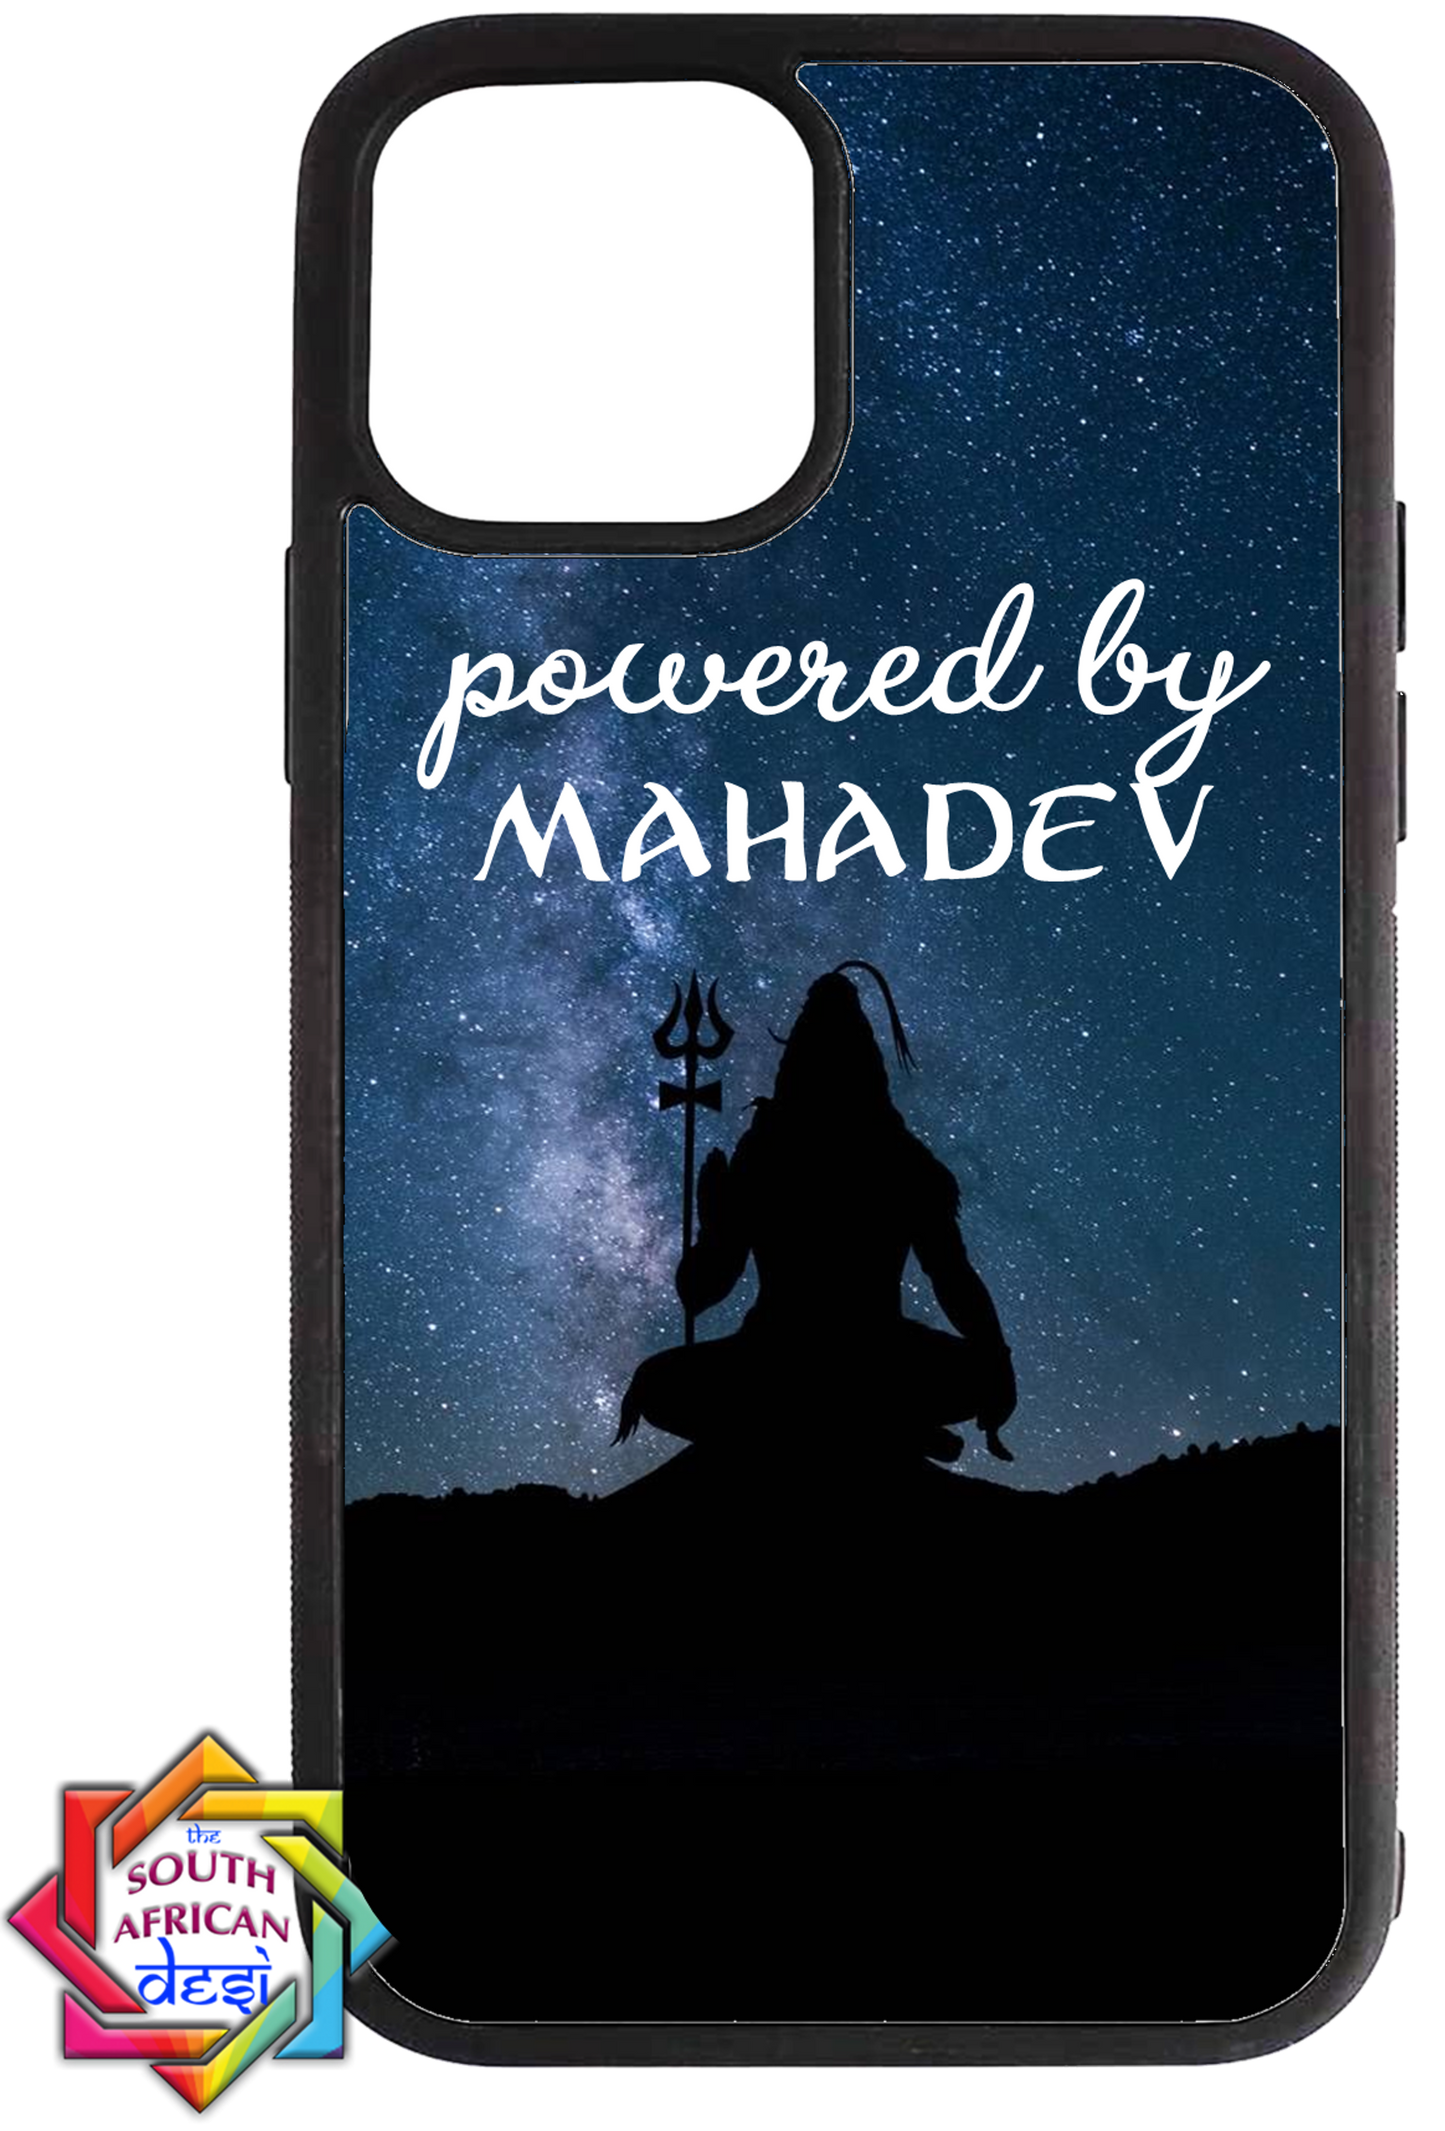 POWERED BY MAHADEV PHONE COVER / CASE